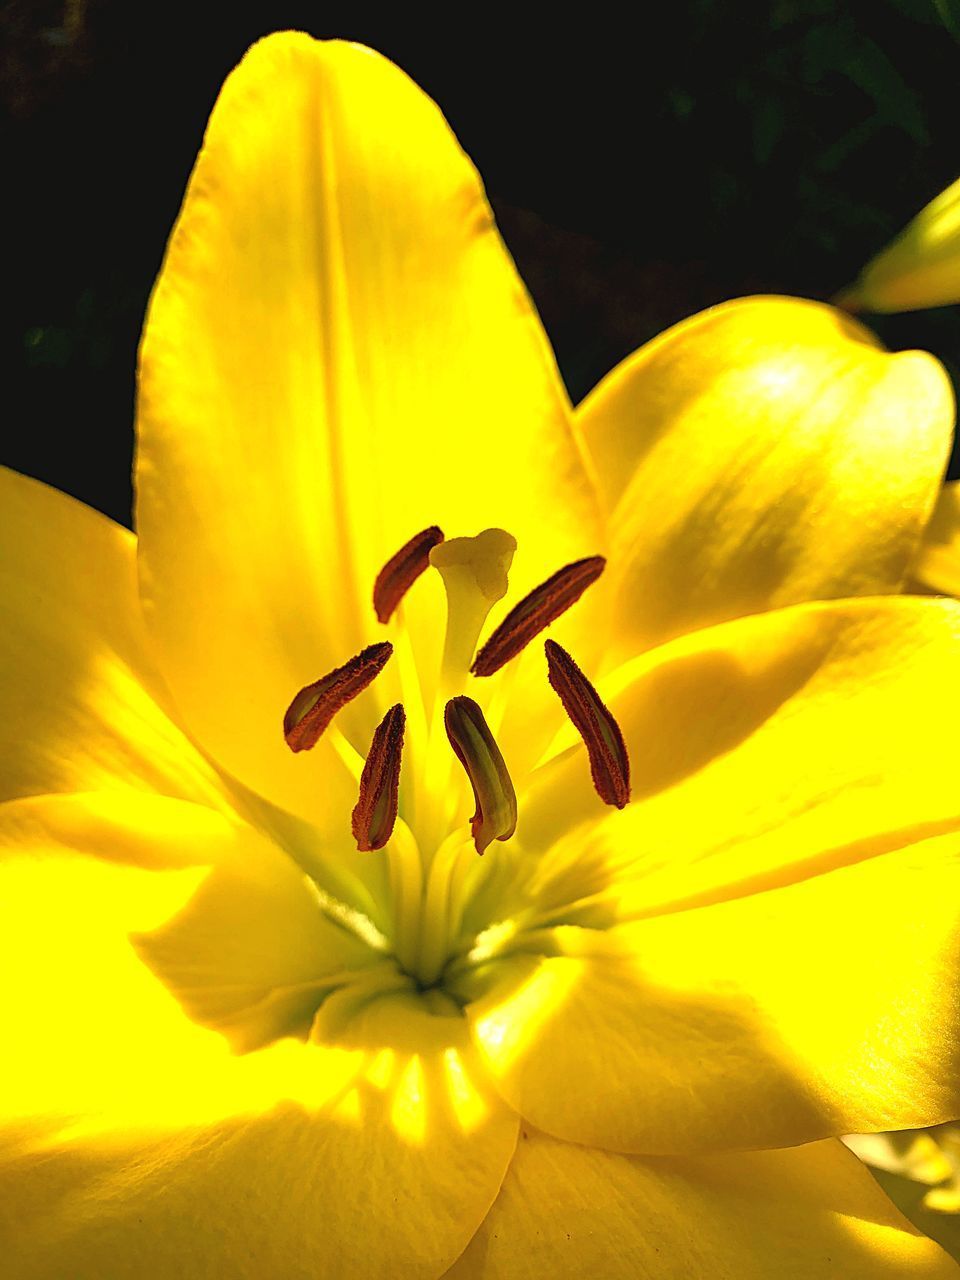 CLOSE-UP OF YELLOW FLOWER HEAD